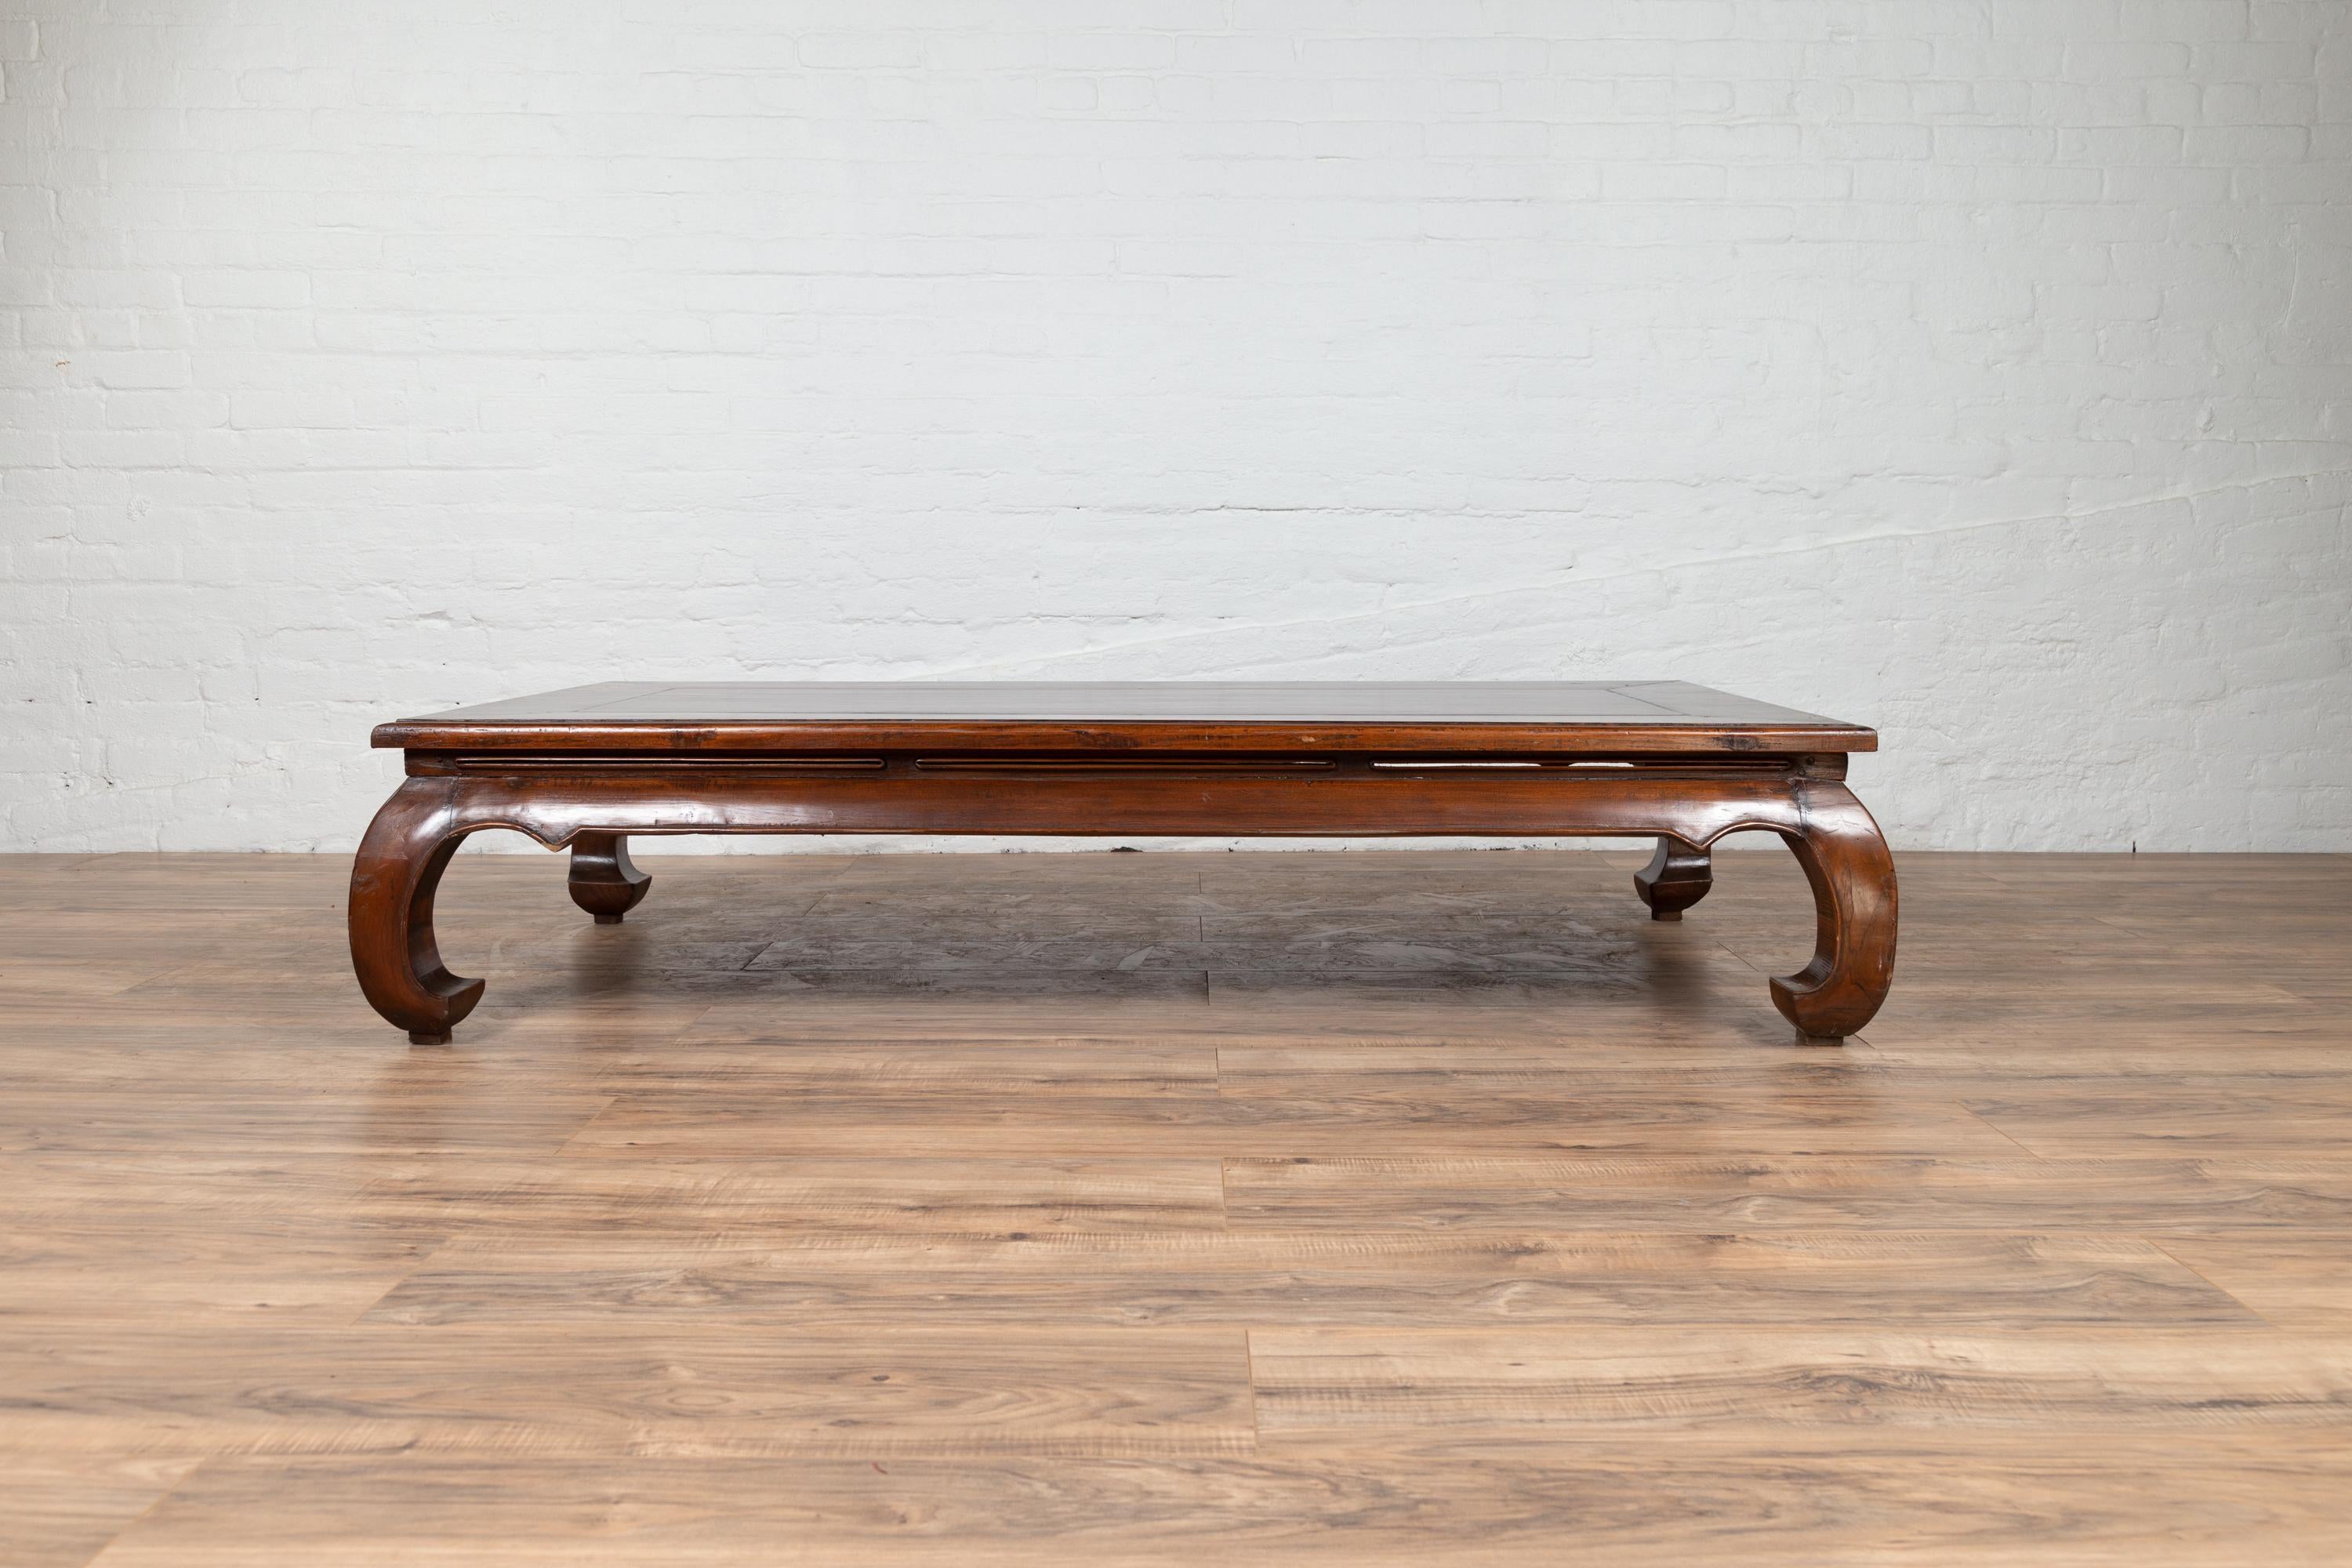 A vintage Chinese long coffee table from the mid-20th century, with chow legs and walnut patina. Born in China during the mid-century period, this large coffee table features a rectangular top with floating panel, sitting above a discreetly pierced